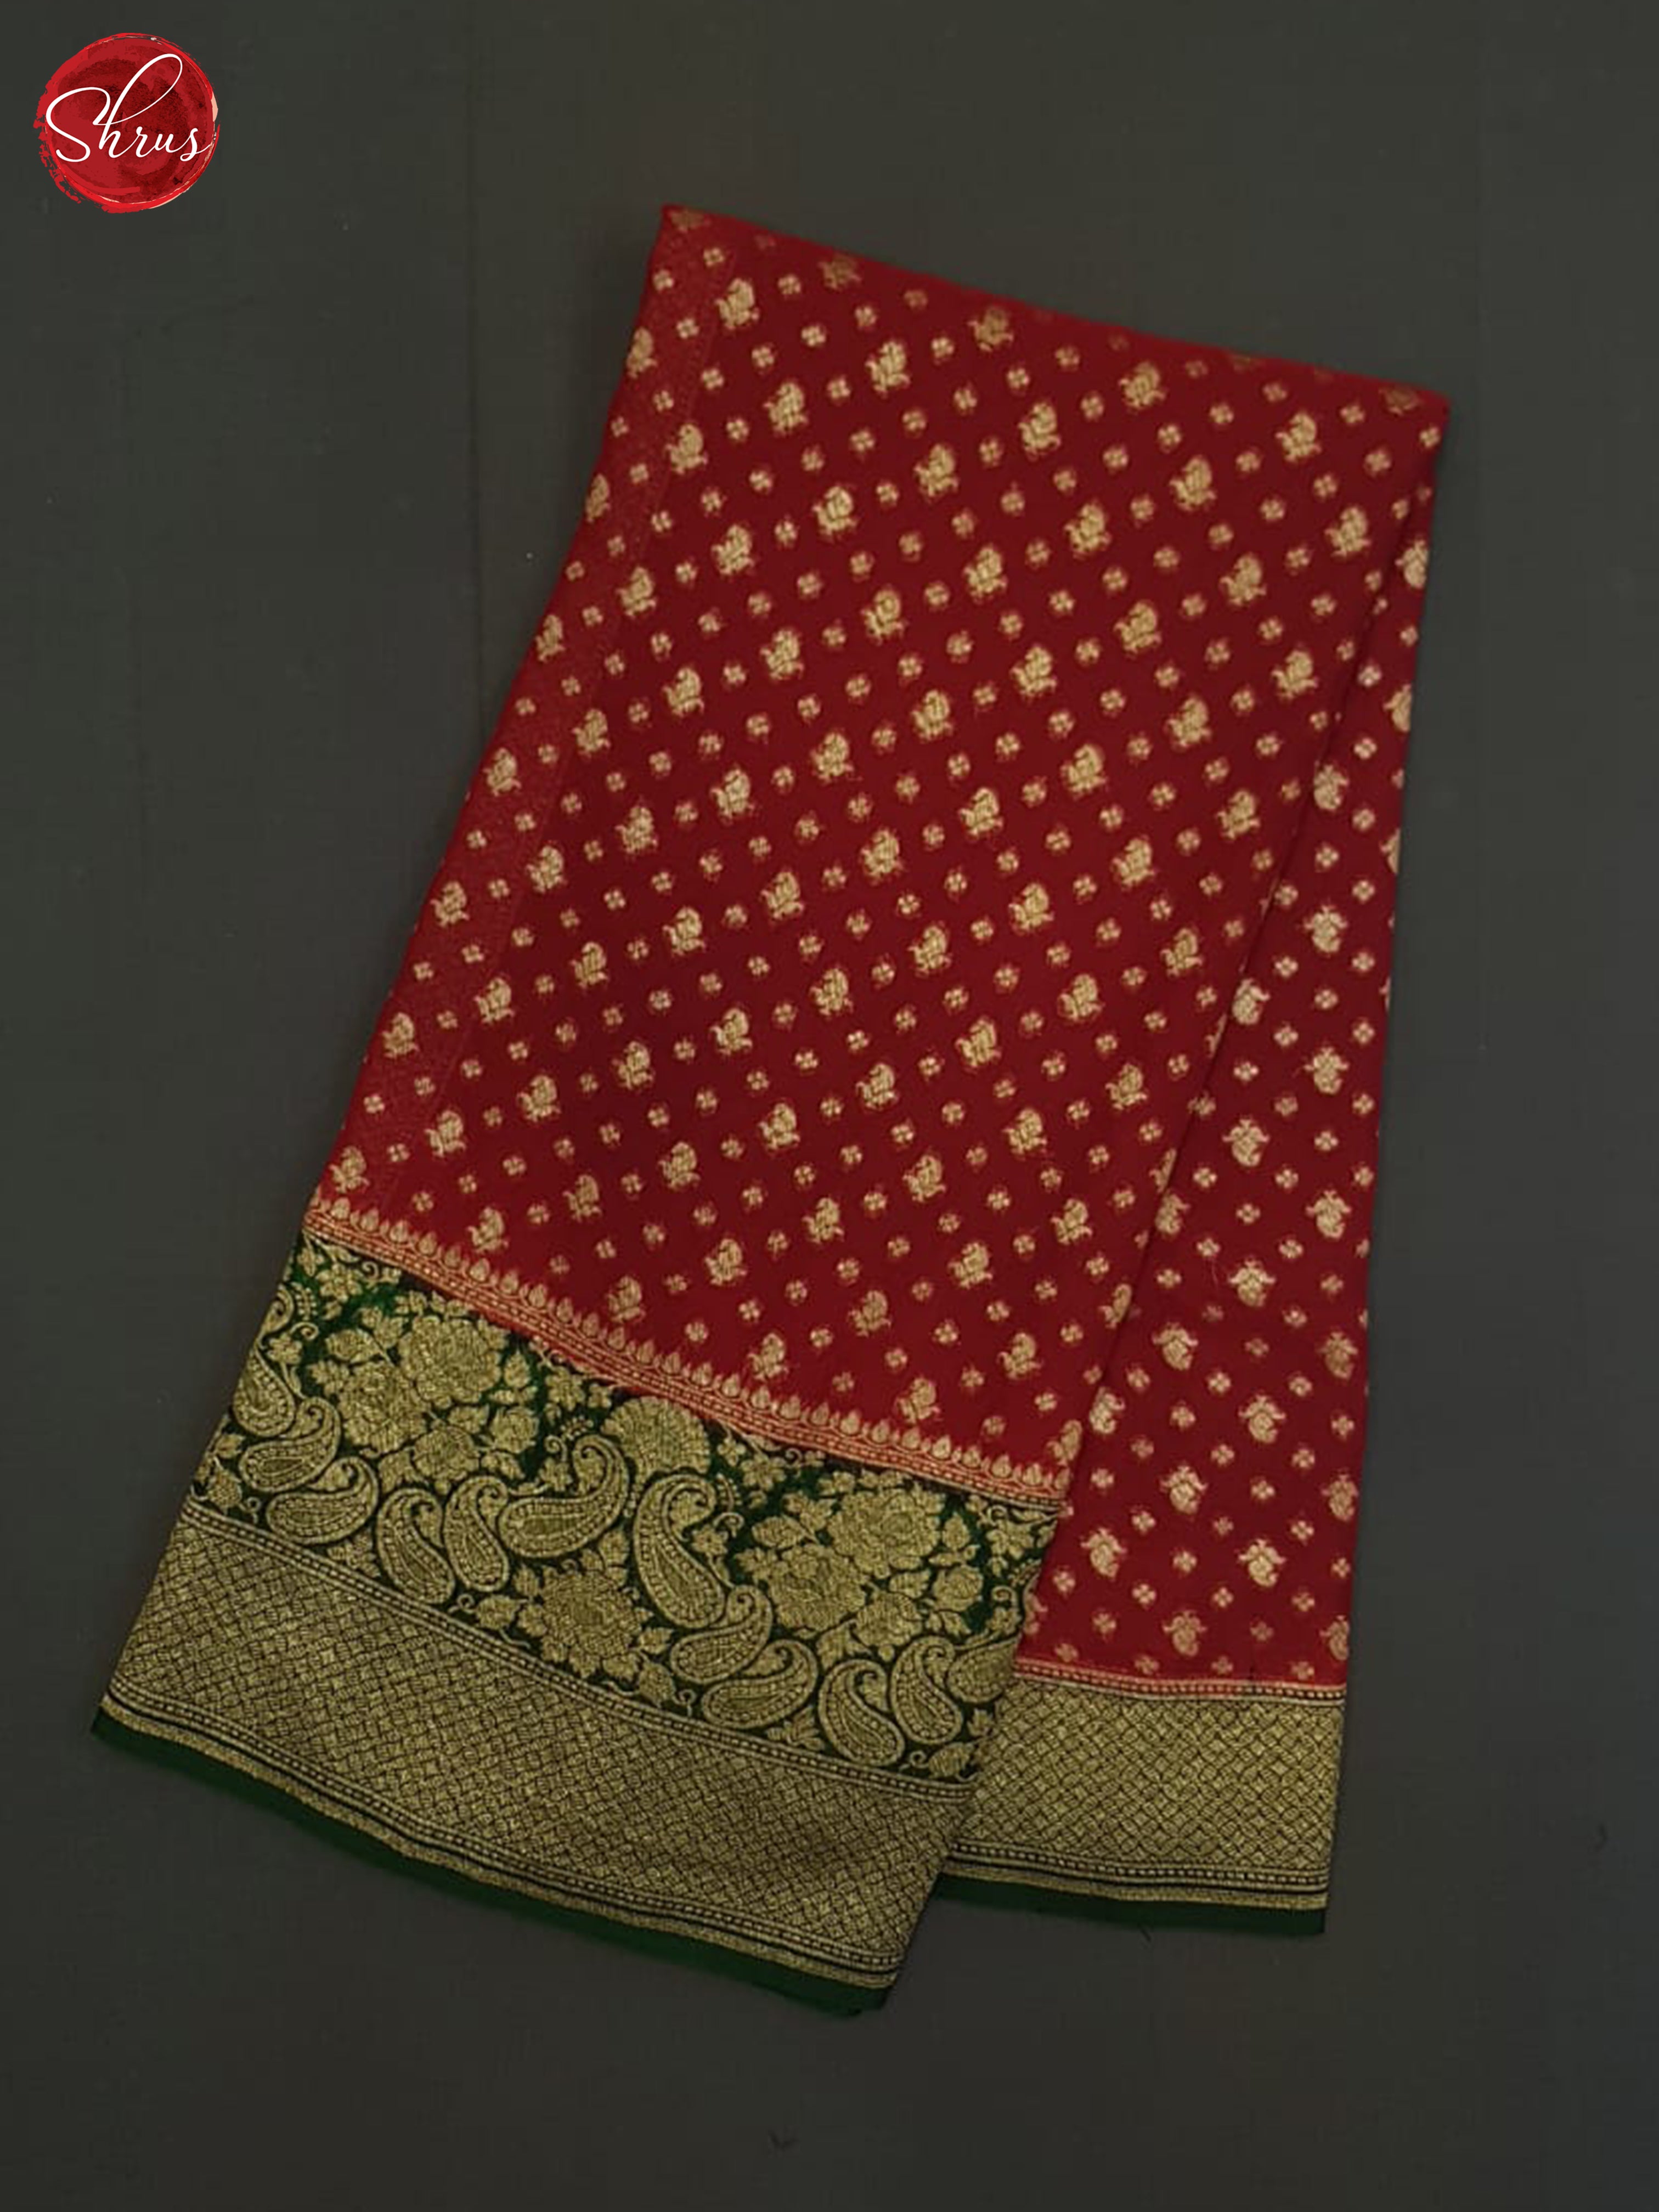 Red & green - Georgette Silk withzari woven floral buttas on the body & Contrast Zari Border - Shop on ShrusEternity.com